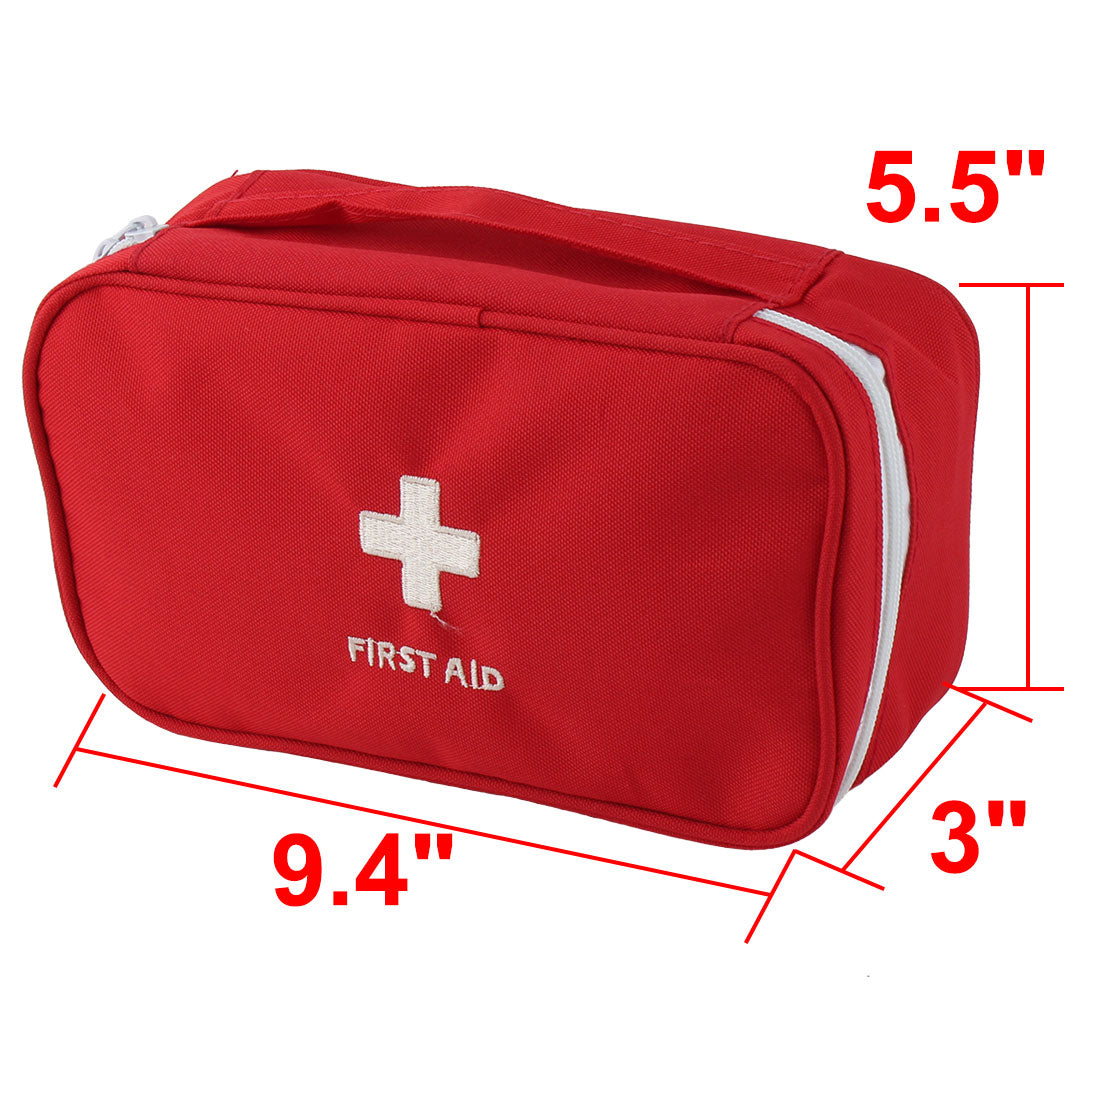 uxcell Uxcell Outdoor Camping Polyester Rectangle Emergency First Aid Medic Rescue Bag Red